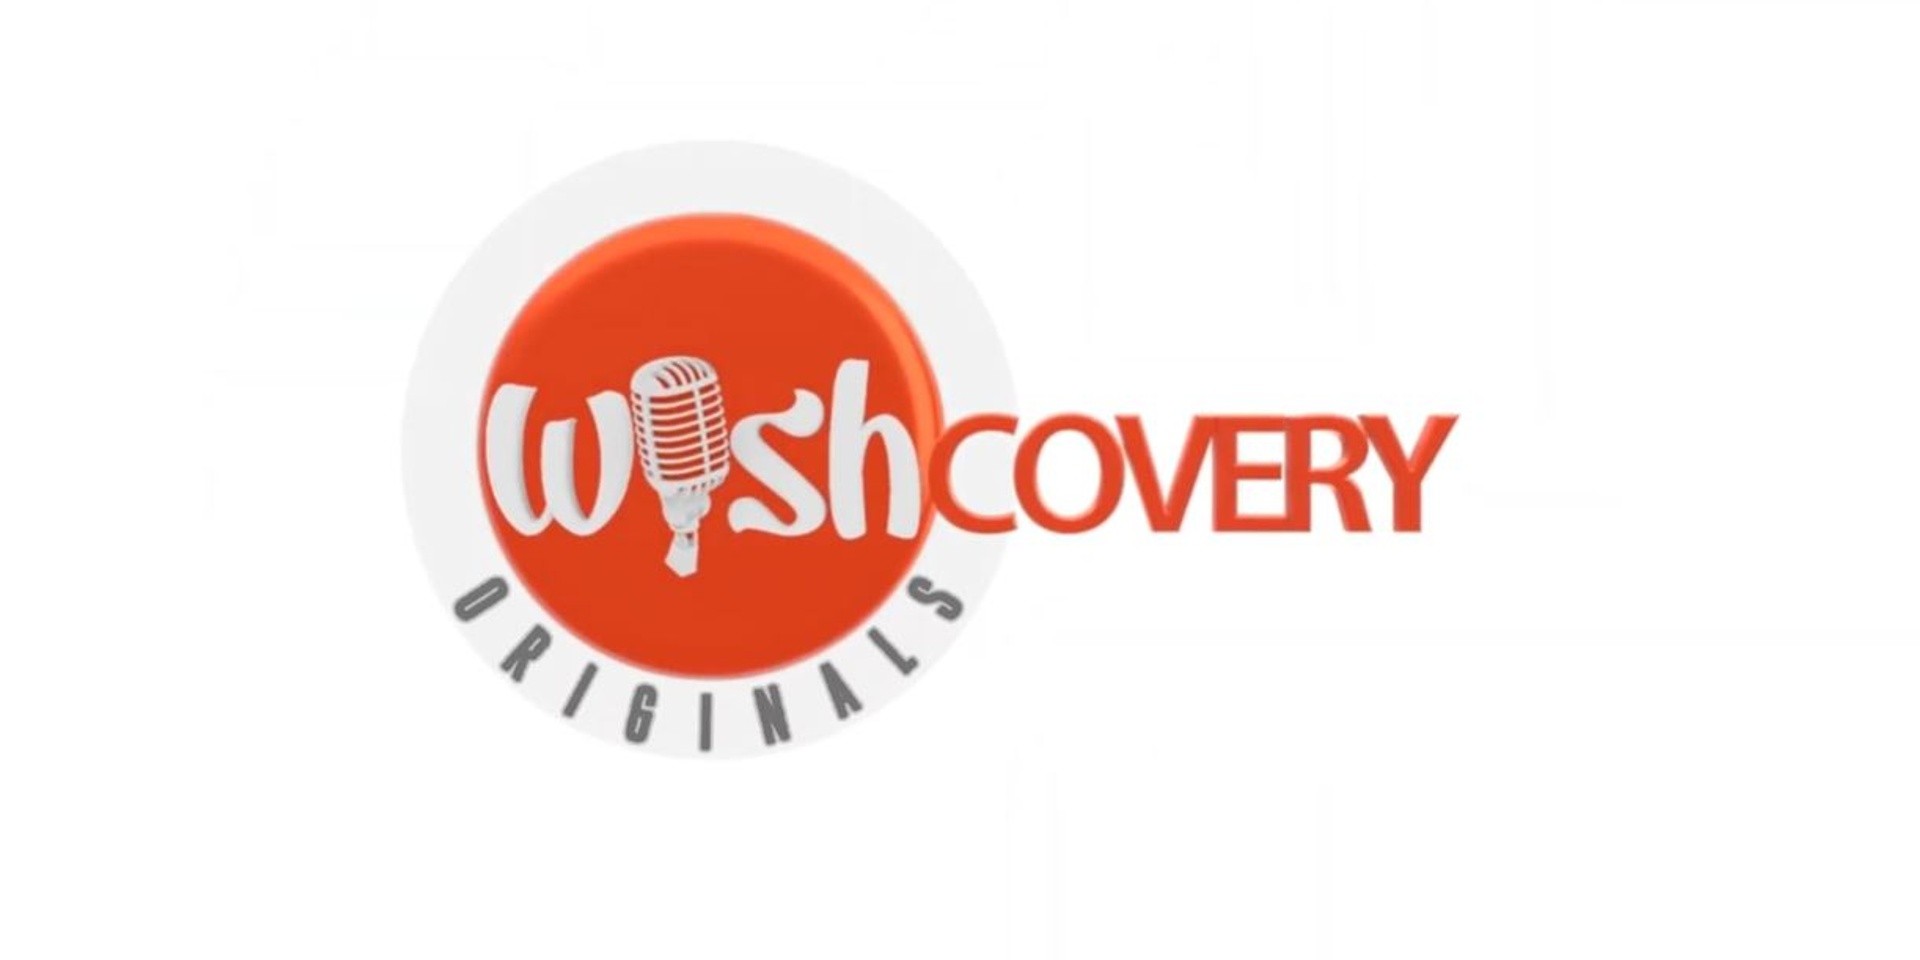 Wishcovery Originals to premiere this September